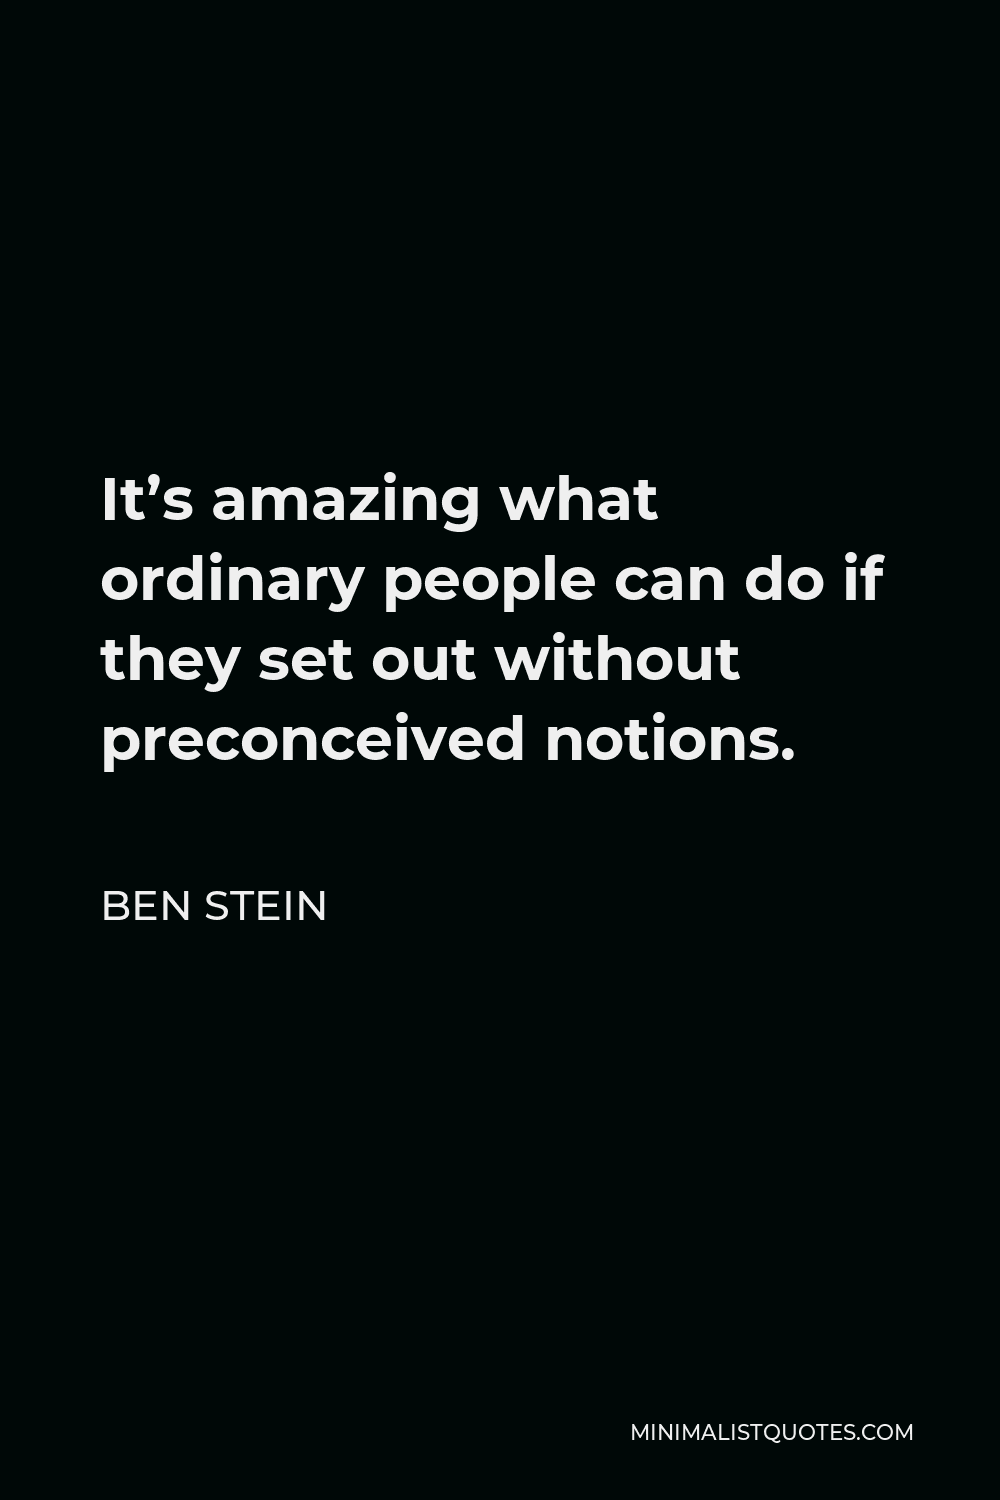 Ben Stein Quote - It’s amazing what ordinary people can do if they set out without preconceived notions.